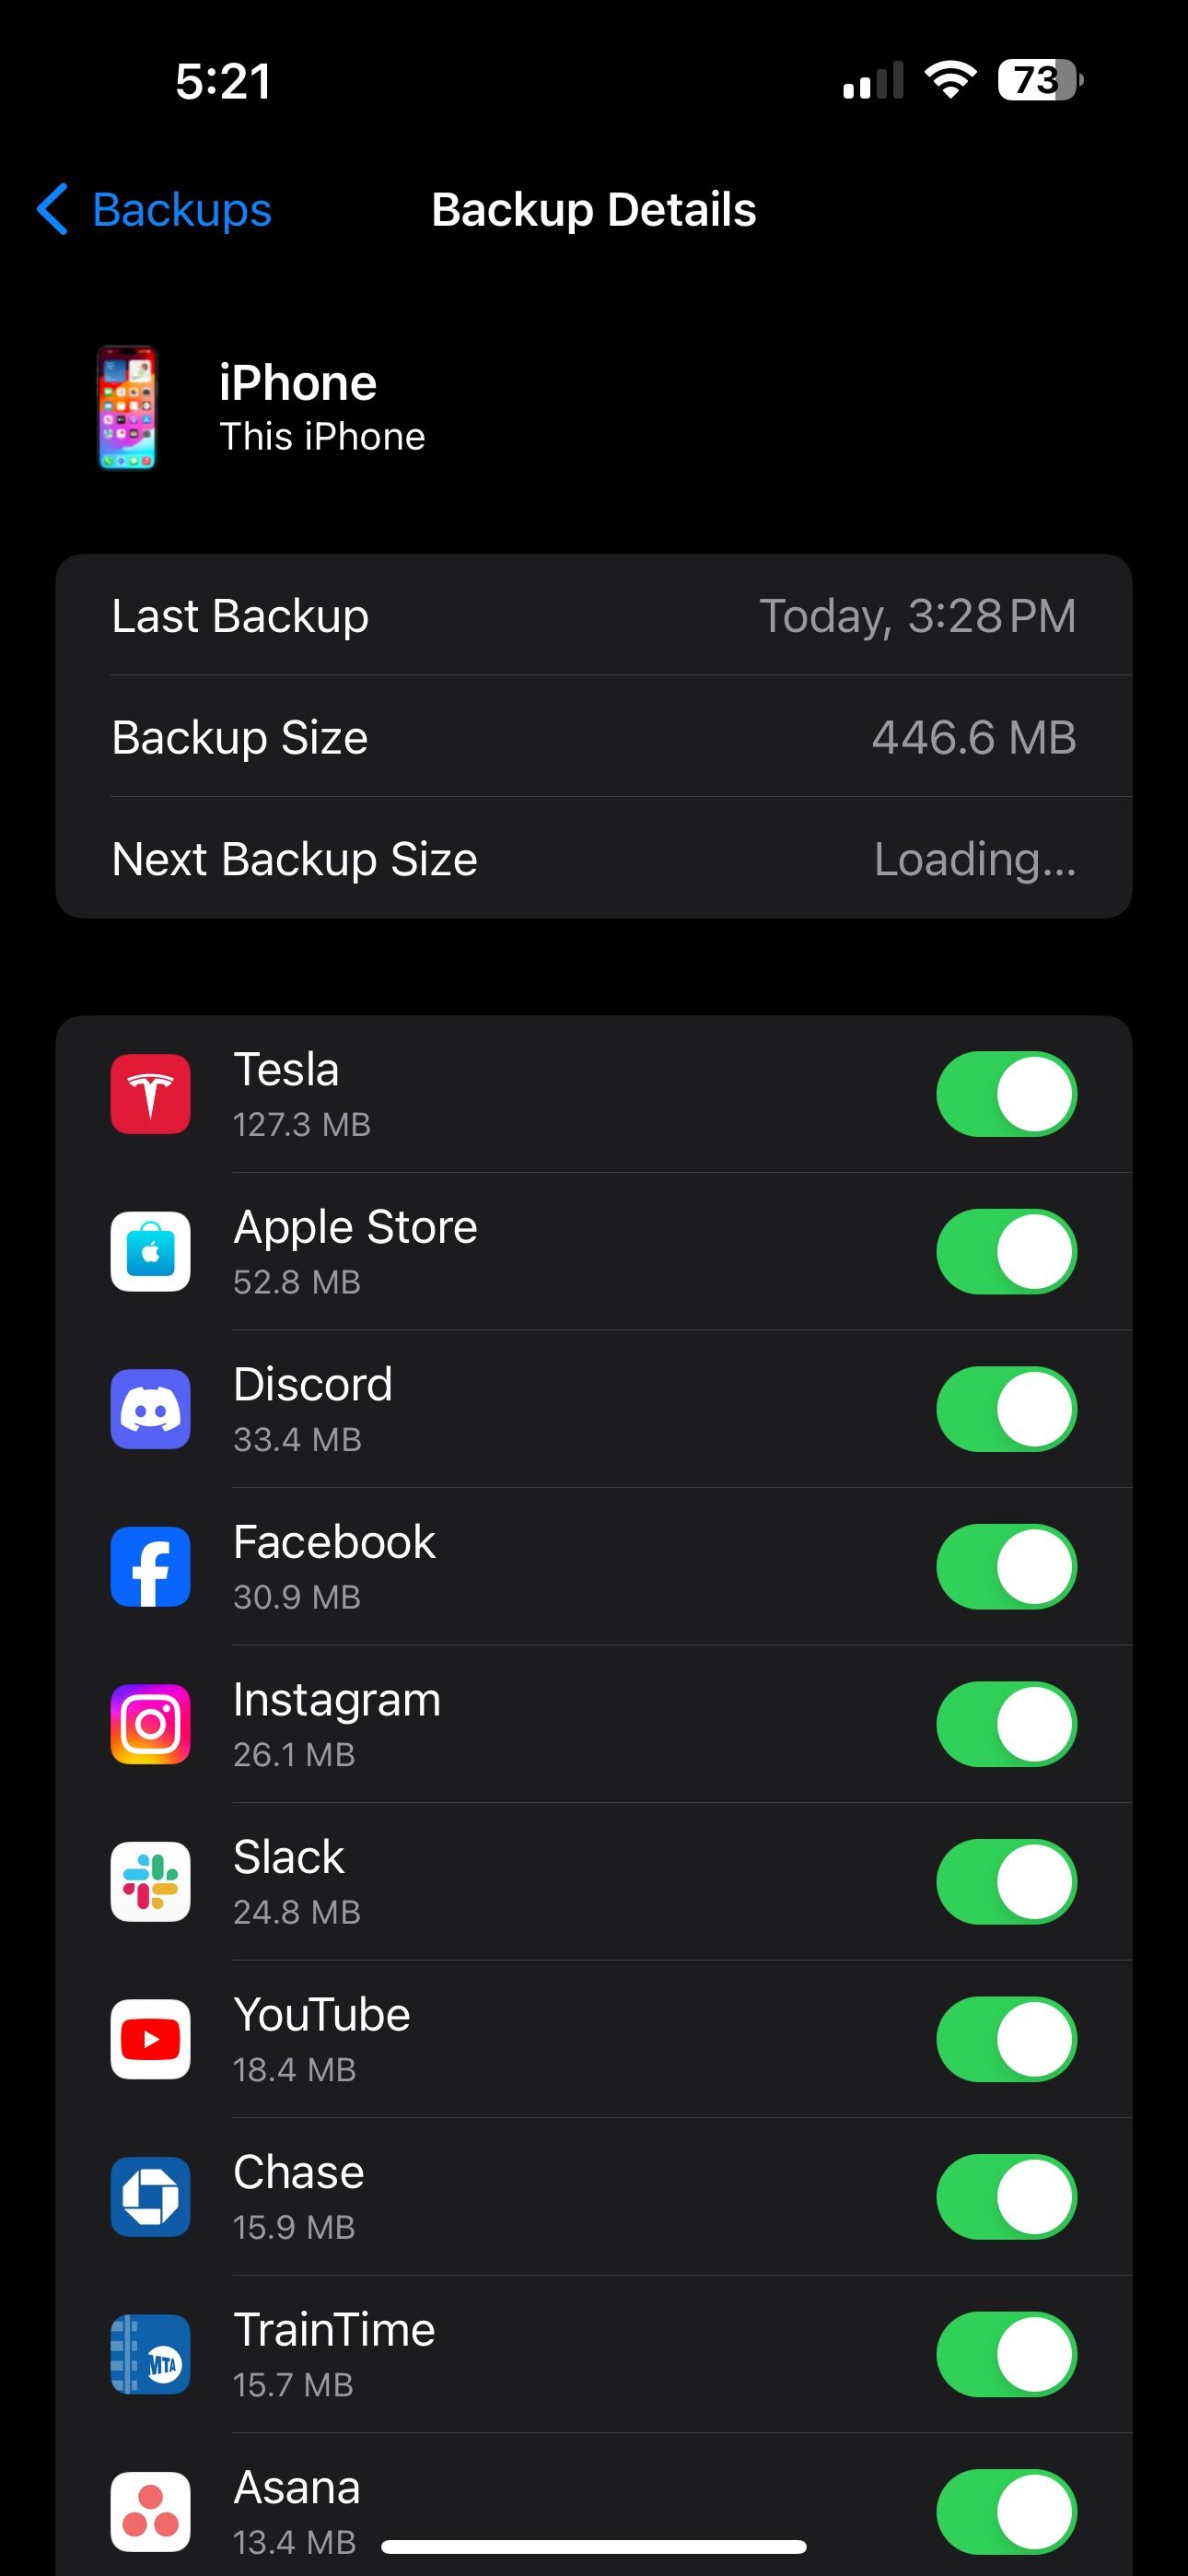 All Apps in a iCloud Backup